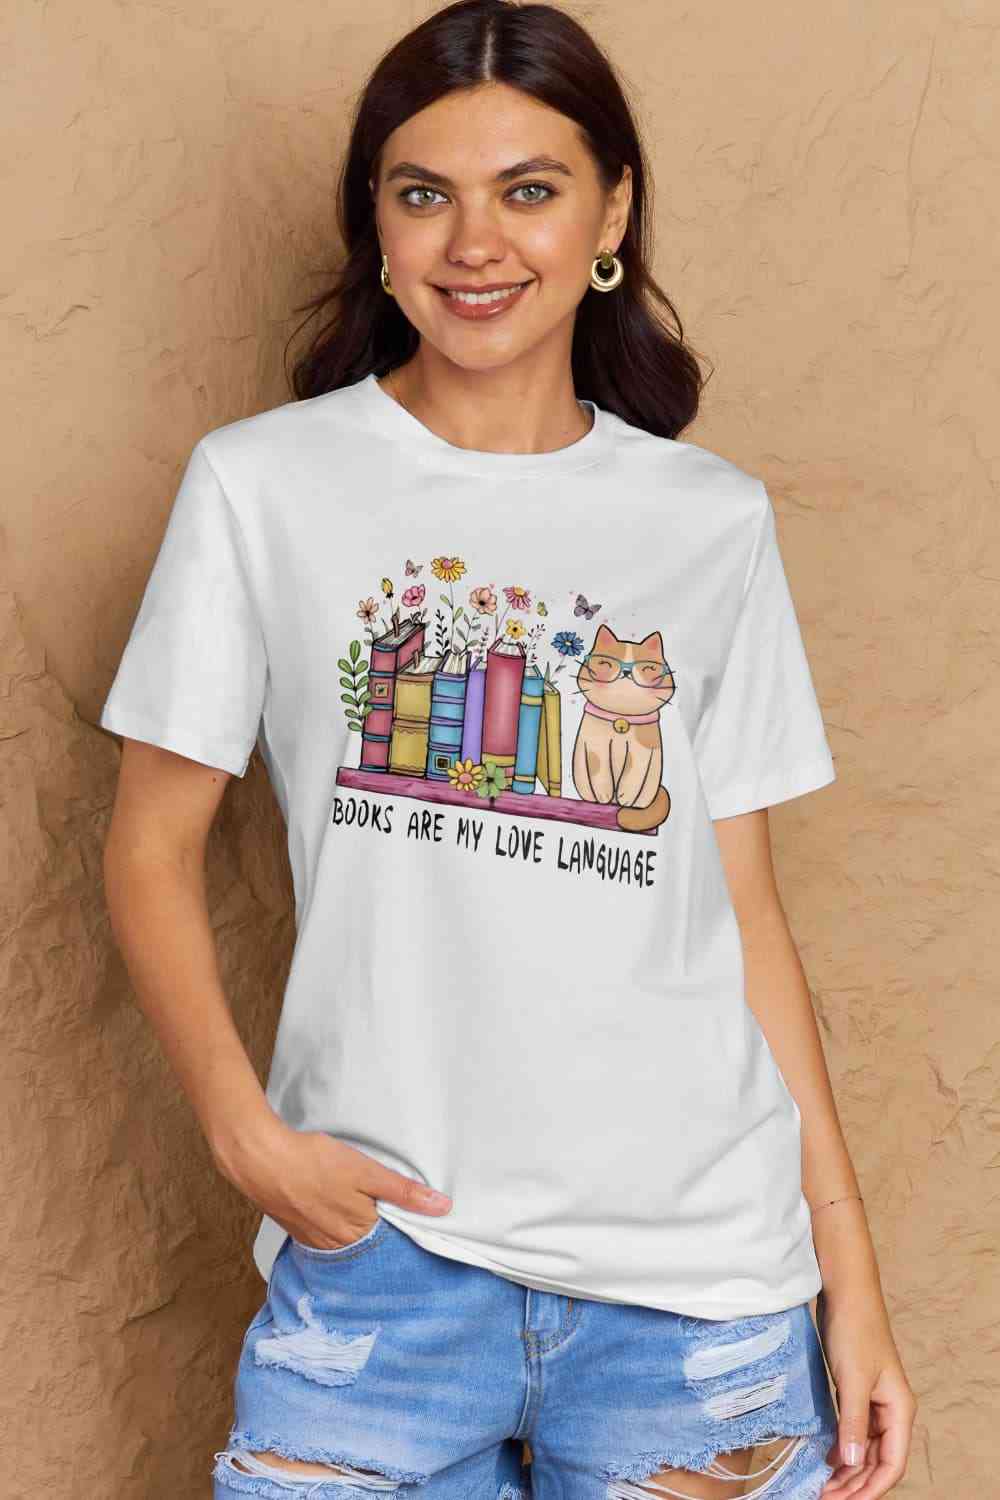 BOOKS ARE MY LOVE LANGUAGE Tee – Where Reading Meets Kitty Cuddles! 🌸🐾